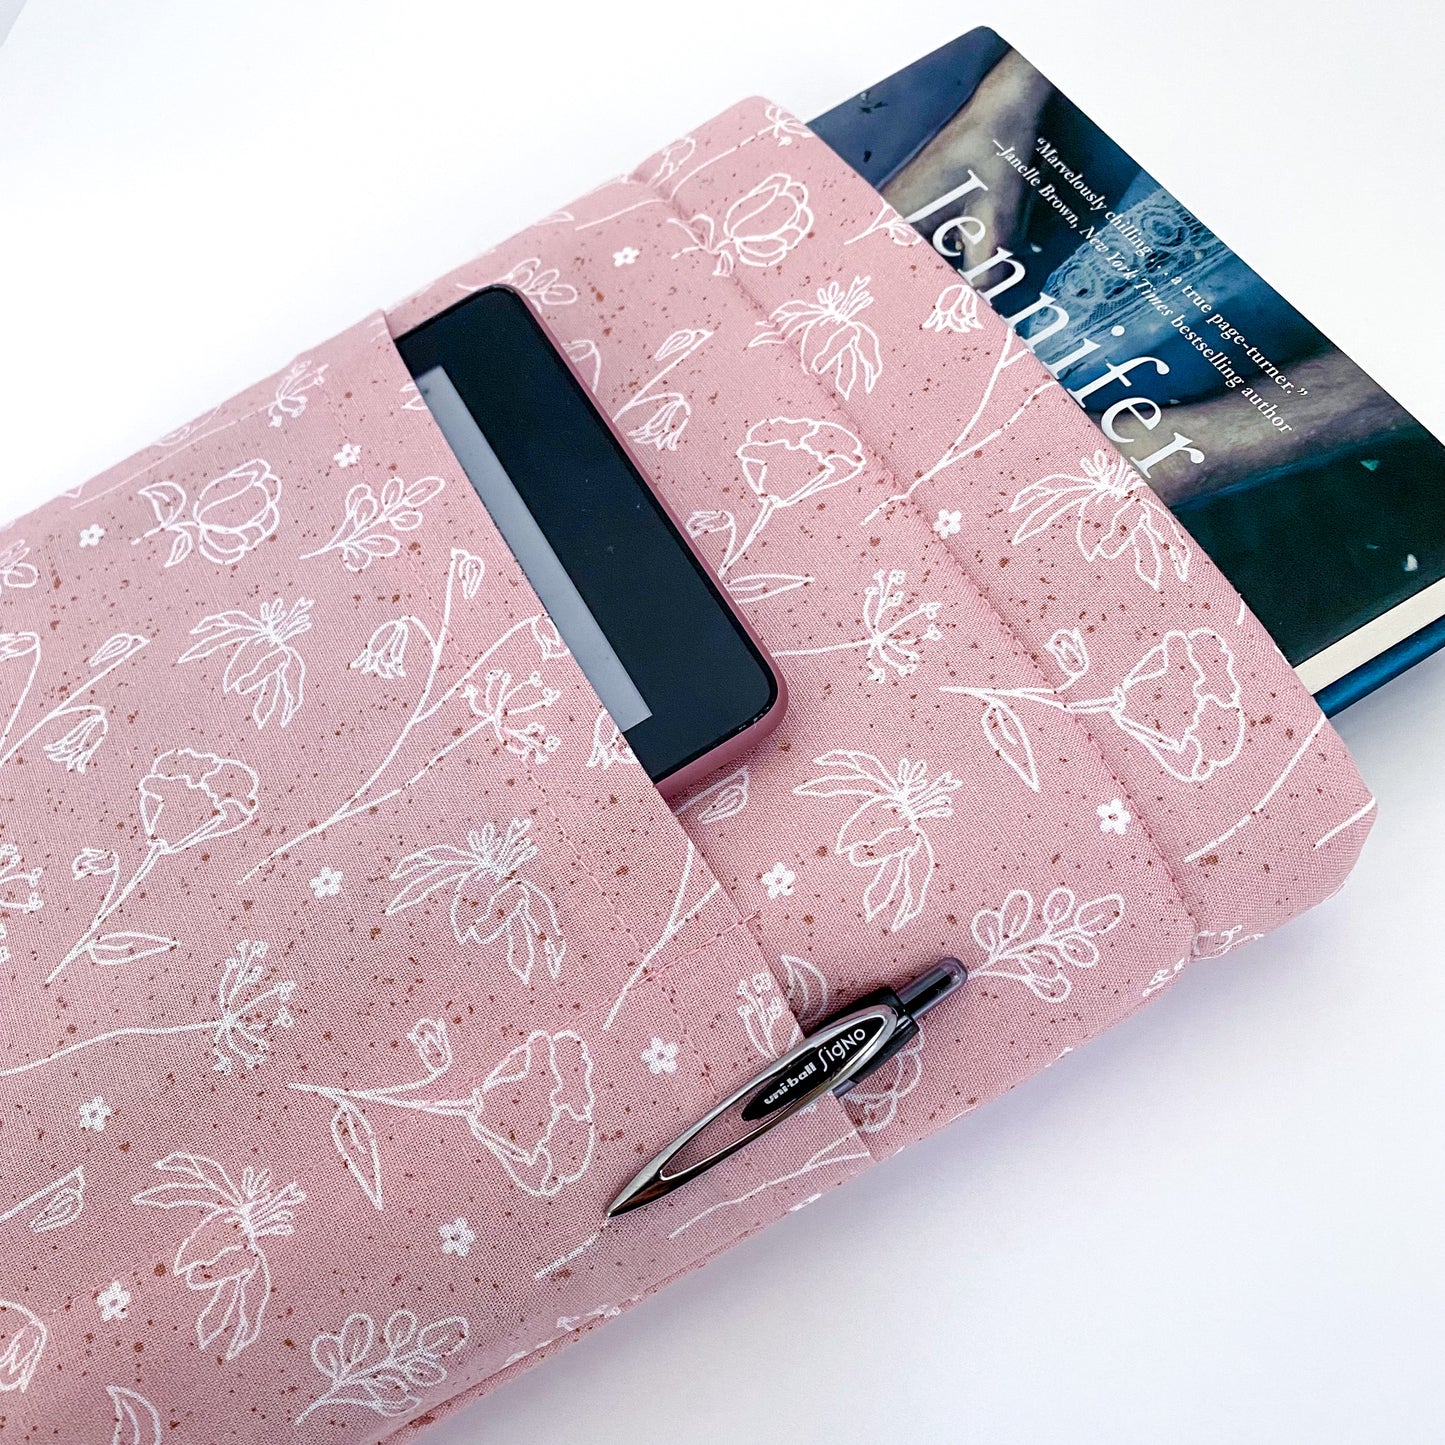 LOVELY PINK FLORAL BOOKSLEEVE